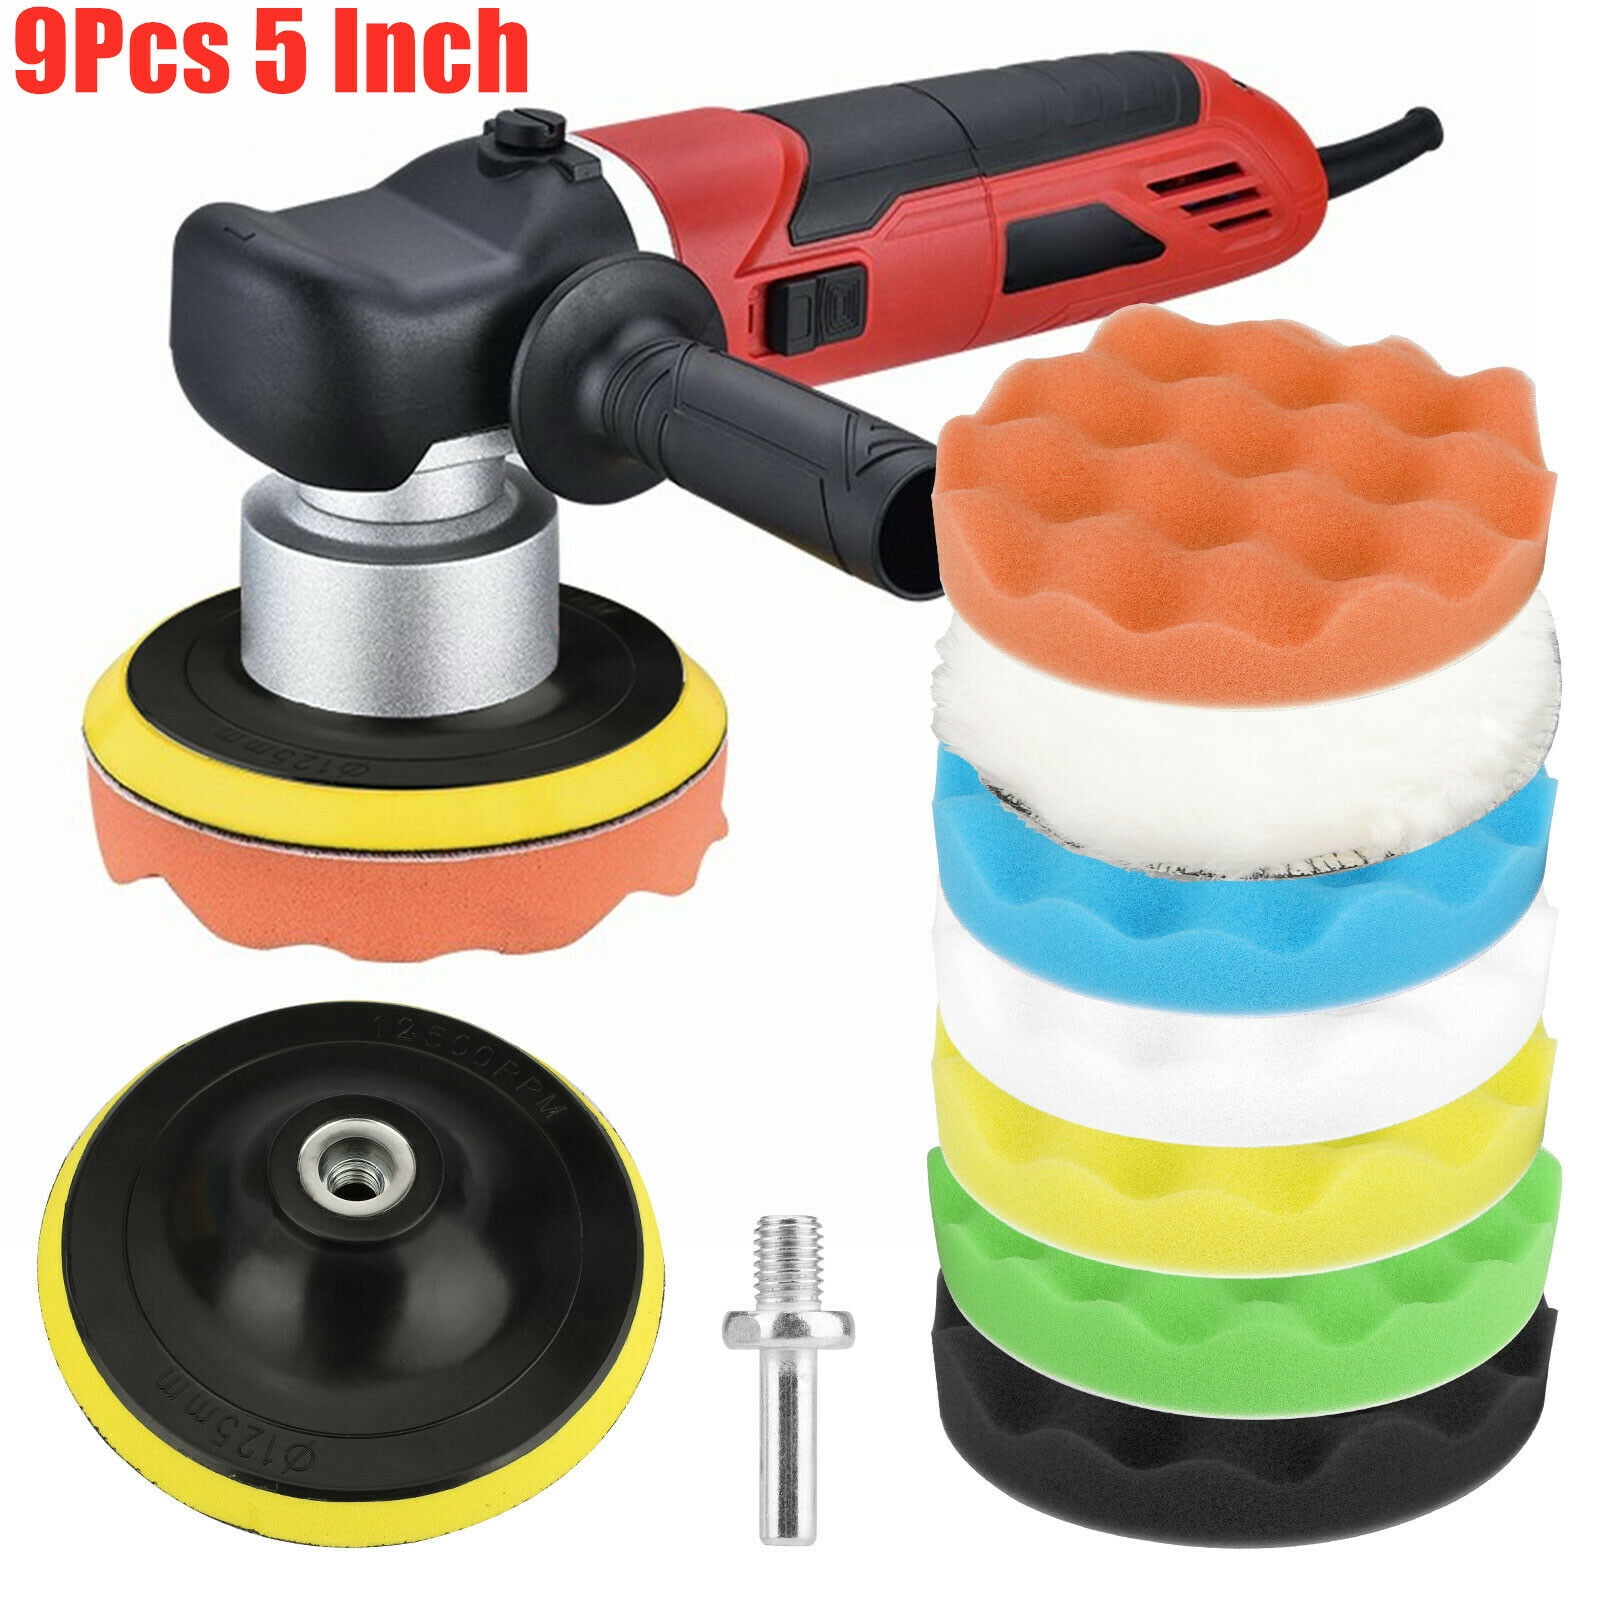 Compound Buffing Pads for Drill Polisher Attachment Polishing Pads for Car Polisher 125mm/5 inch Polishing Pads for Drill Sponge Waxing Buffing Pads Kit Auto Car Scratch Cleaning Accessories 5 PCS